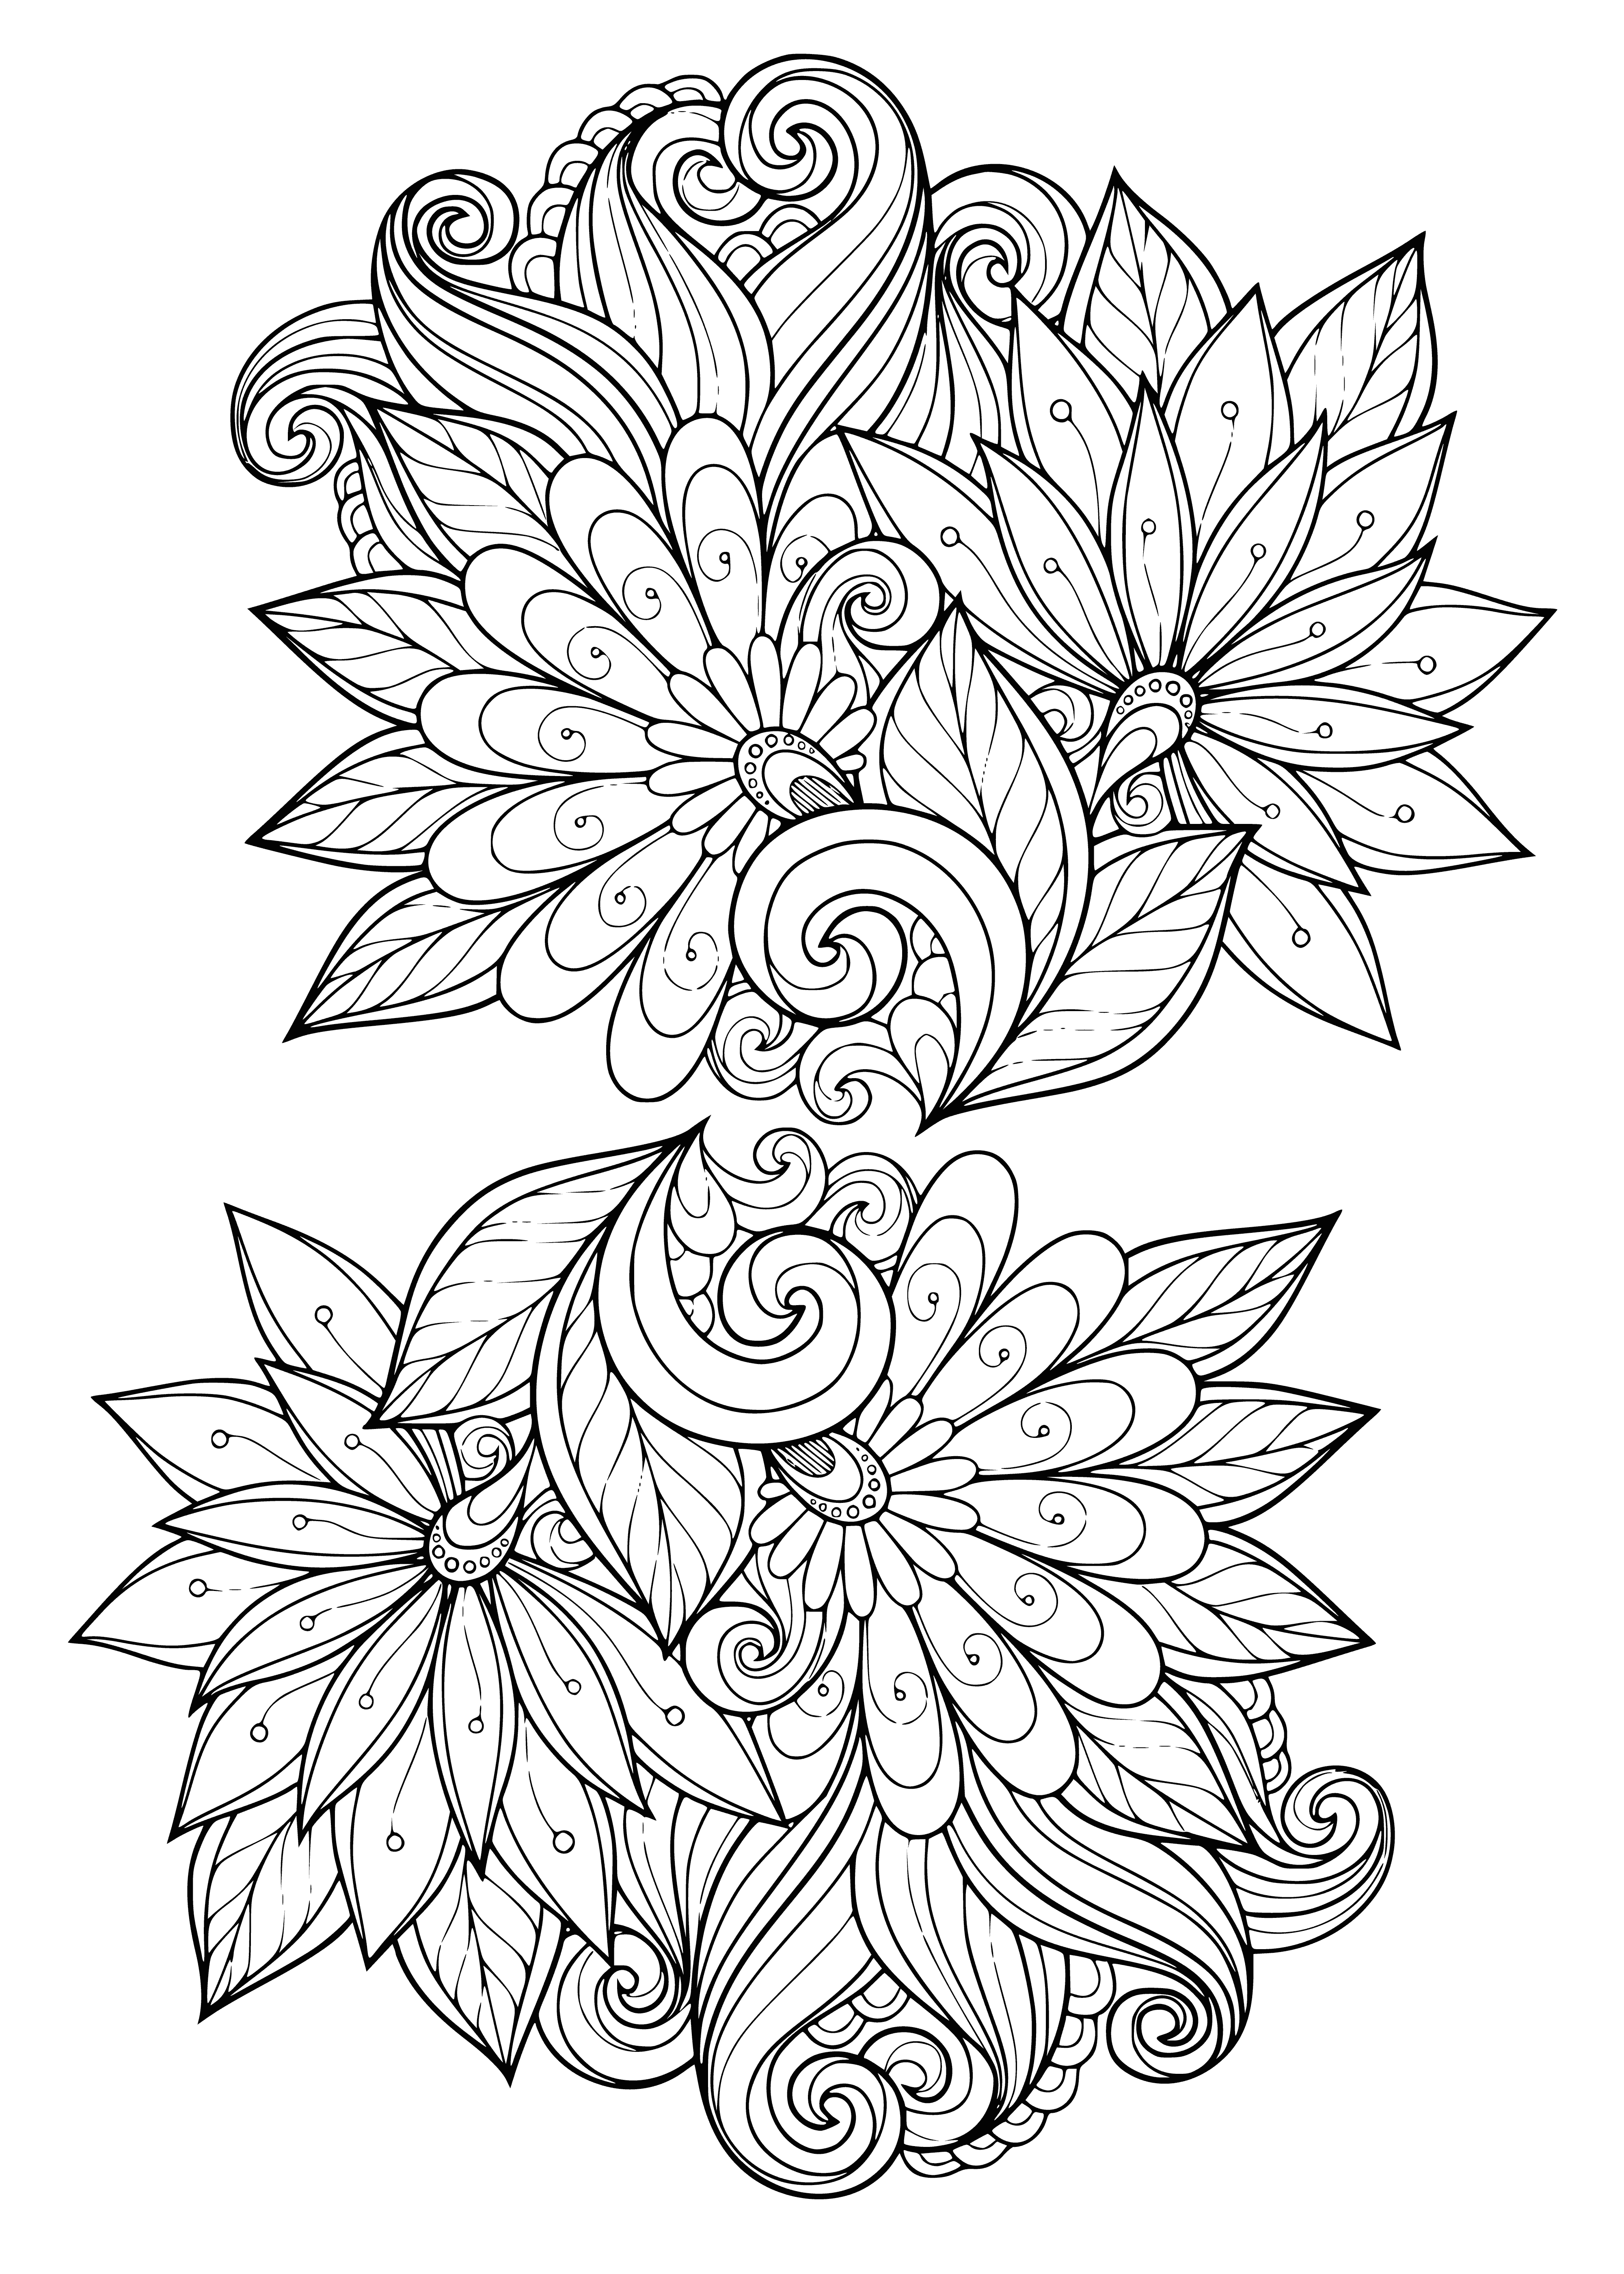 coloring page: A colorful flower-filled coloring page with roses, daisies, sunflowers and more. Leaves and stems abound! #coloringpage #flowers